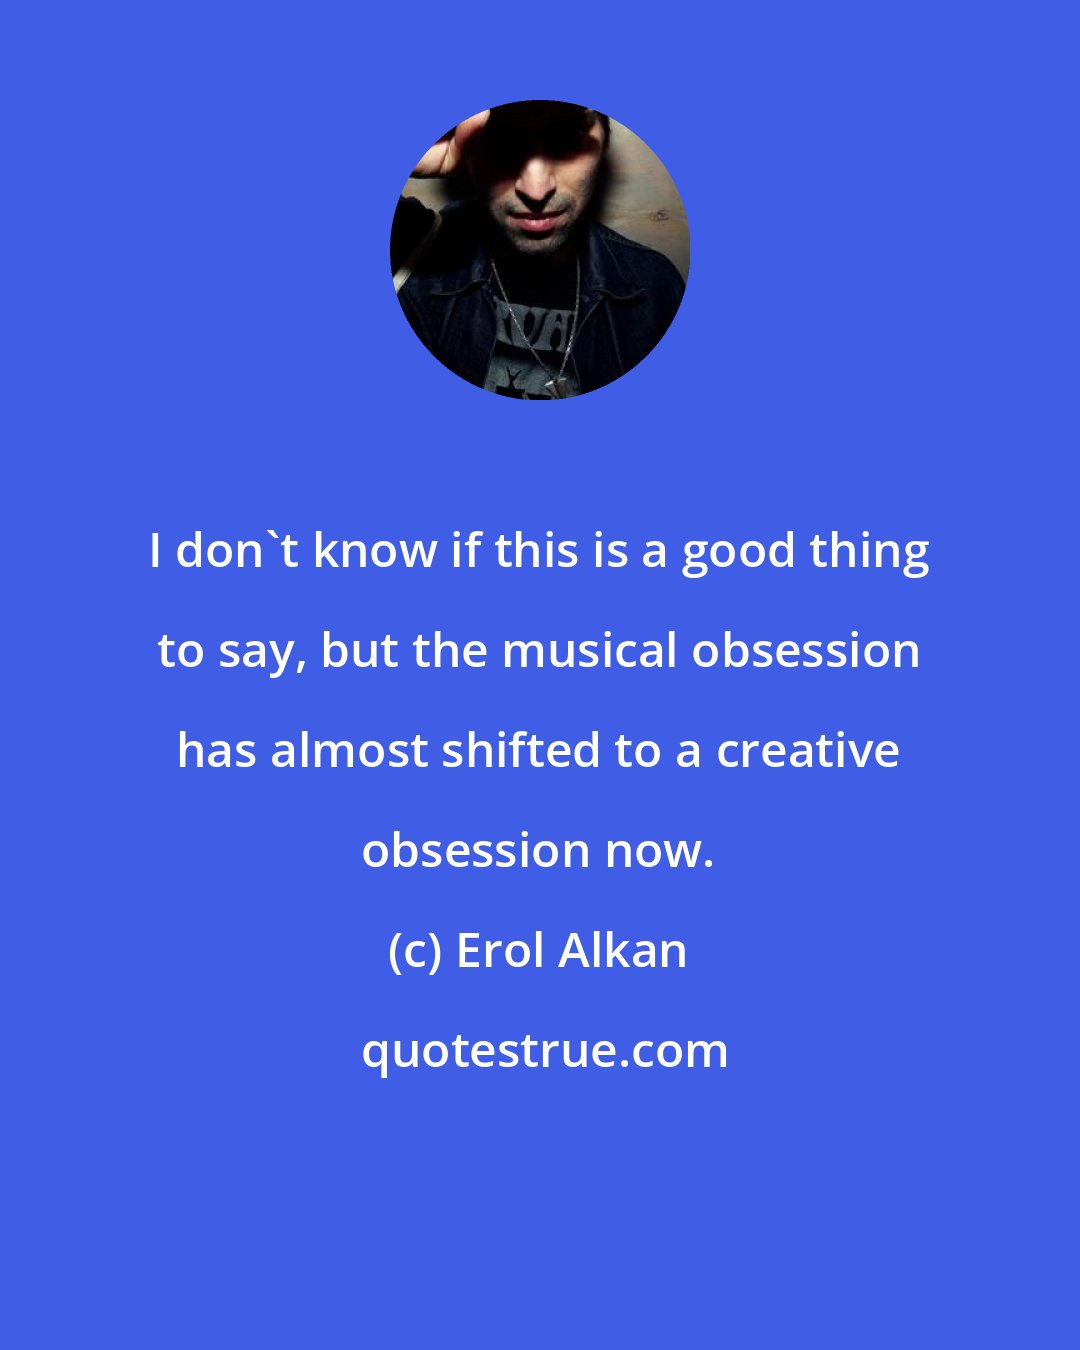 Erol Alkan: I don't know if this is a good thing to say, but the musical obsession has almost shifted to a creative obsession now.